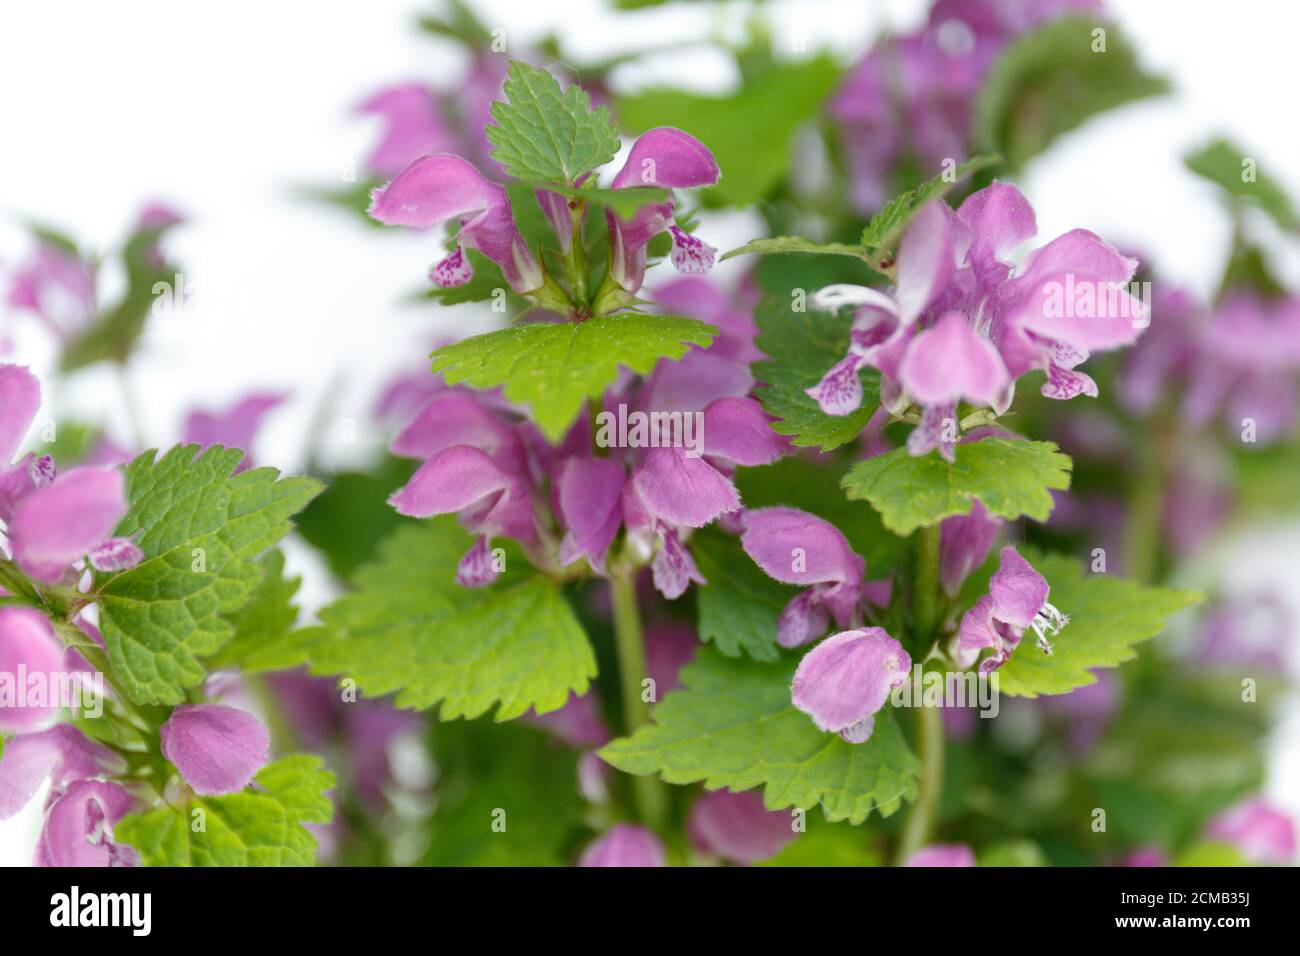 Lamium purpureum. Purple flowers with green leaves on a white background Stock Photo